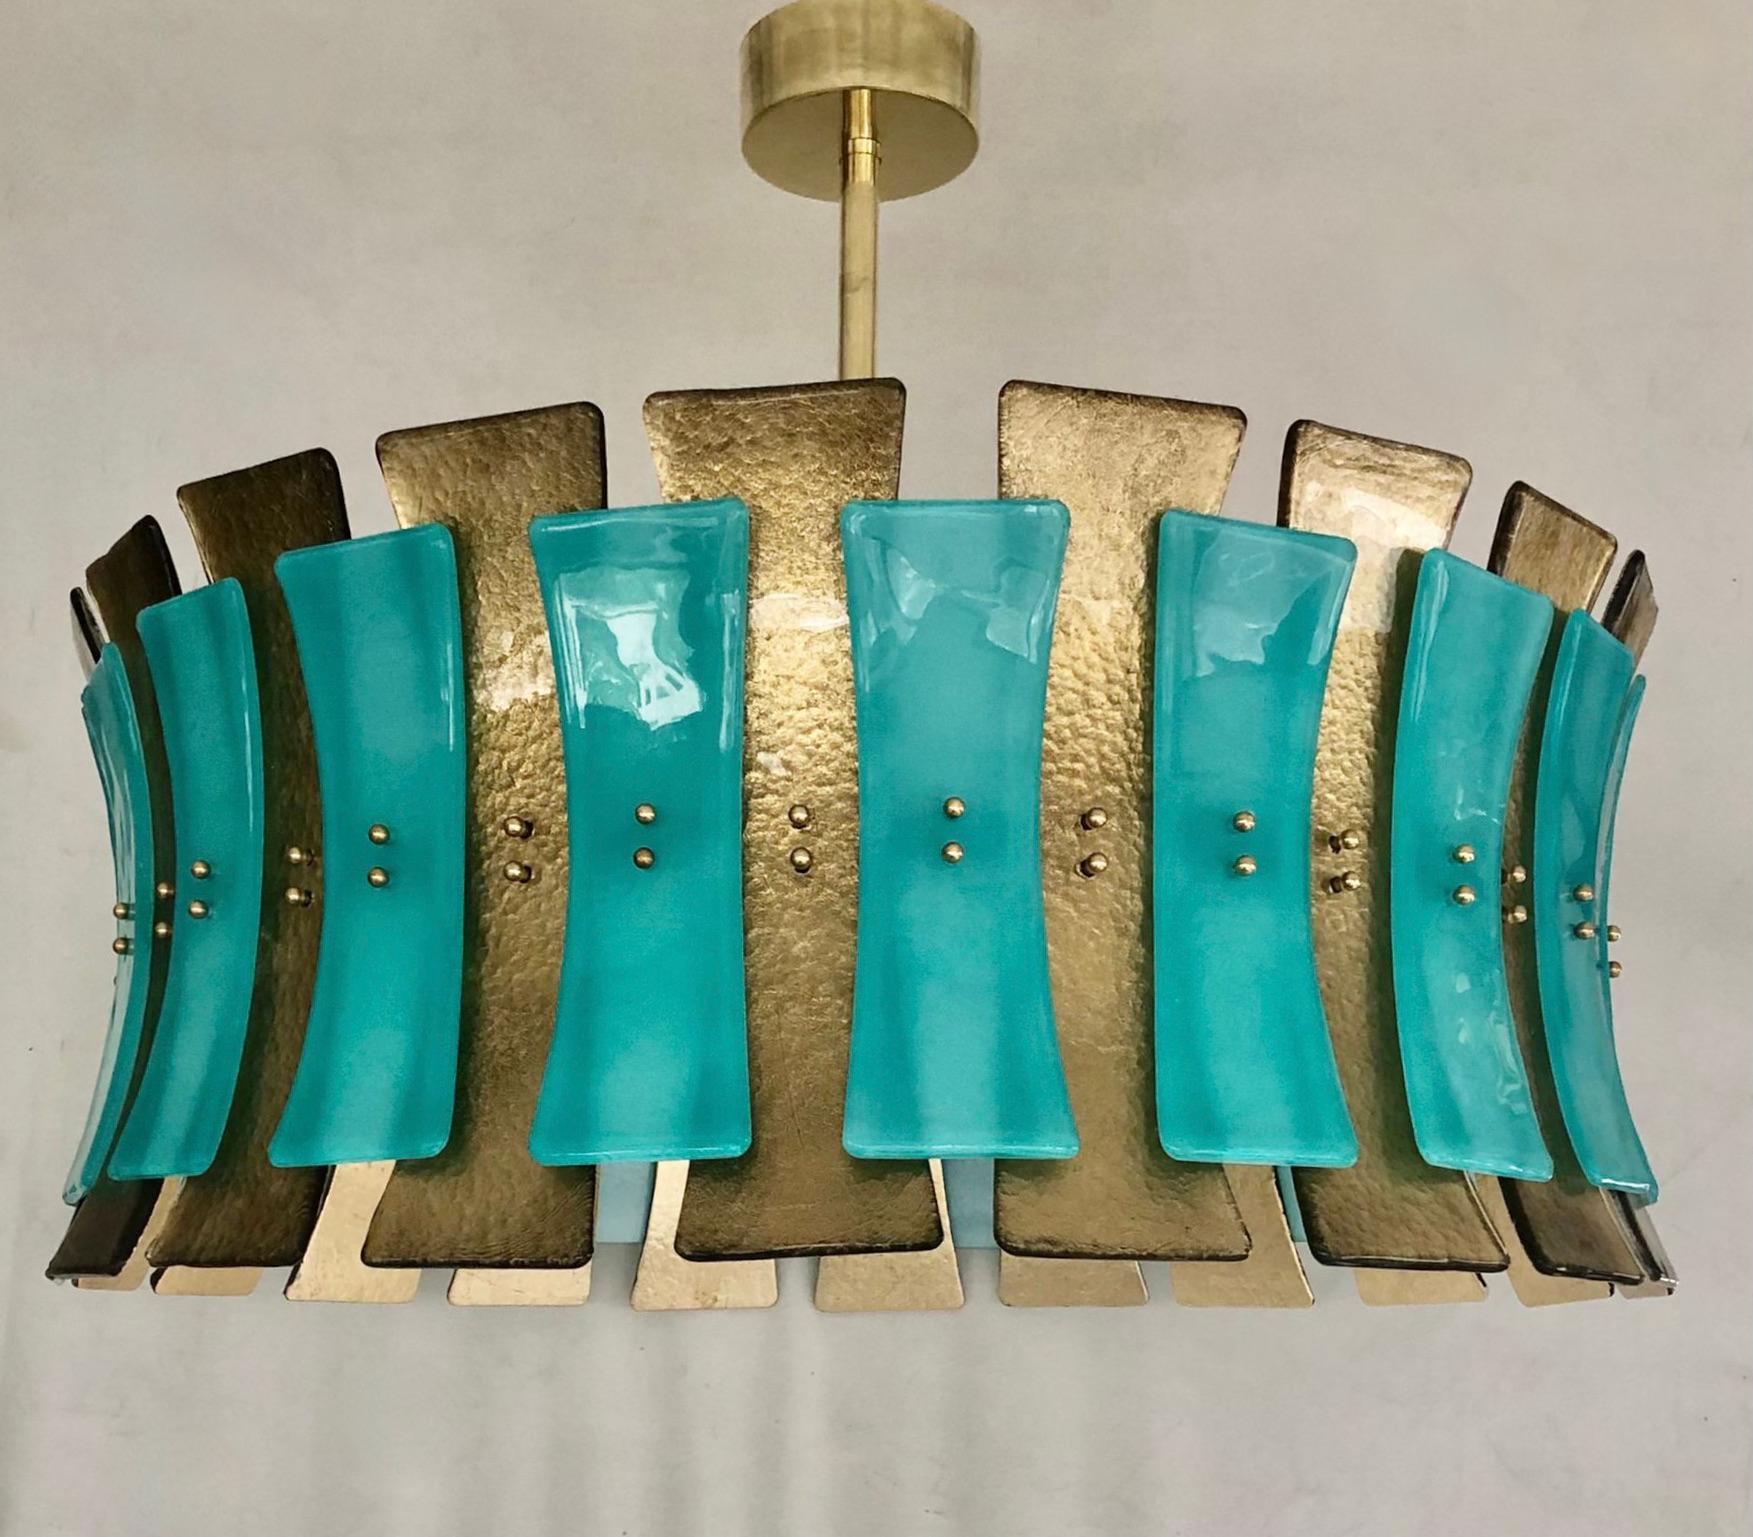 Pure elegance, for this chandelier from the midcentury of Murano. Strong color and beautiful design. Simple but with an exciting color.

Its structure is round and made of iron colored in gold, with specially cut and colored slides positioned all